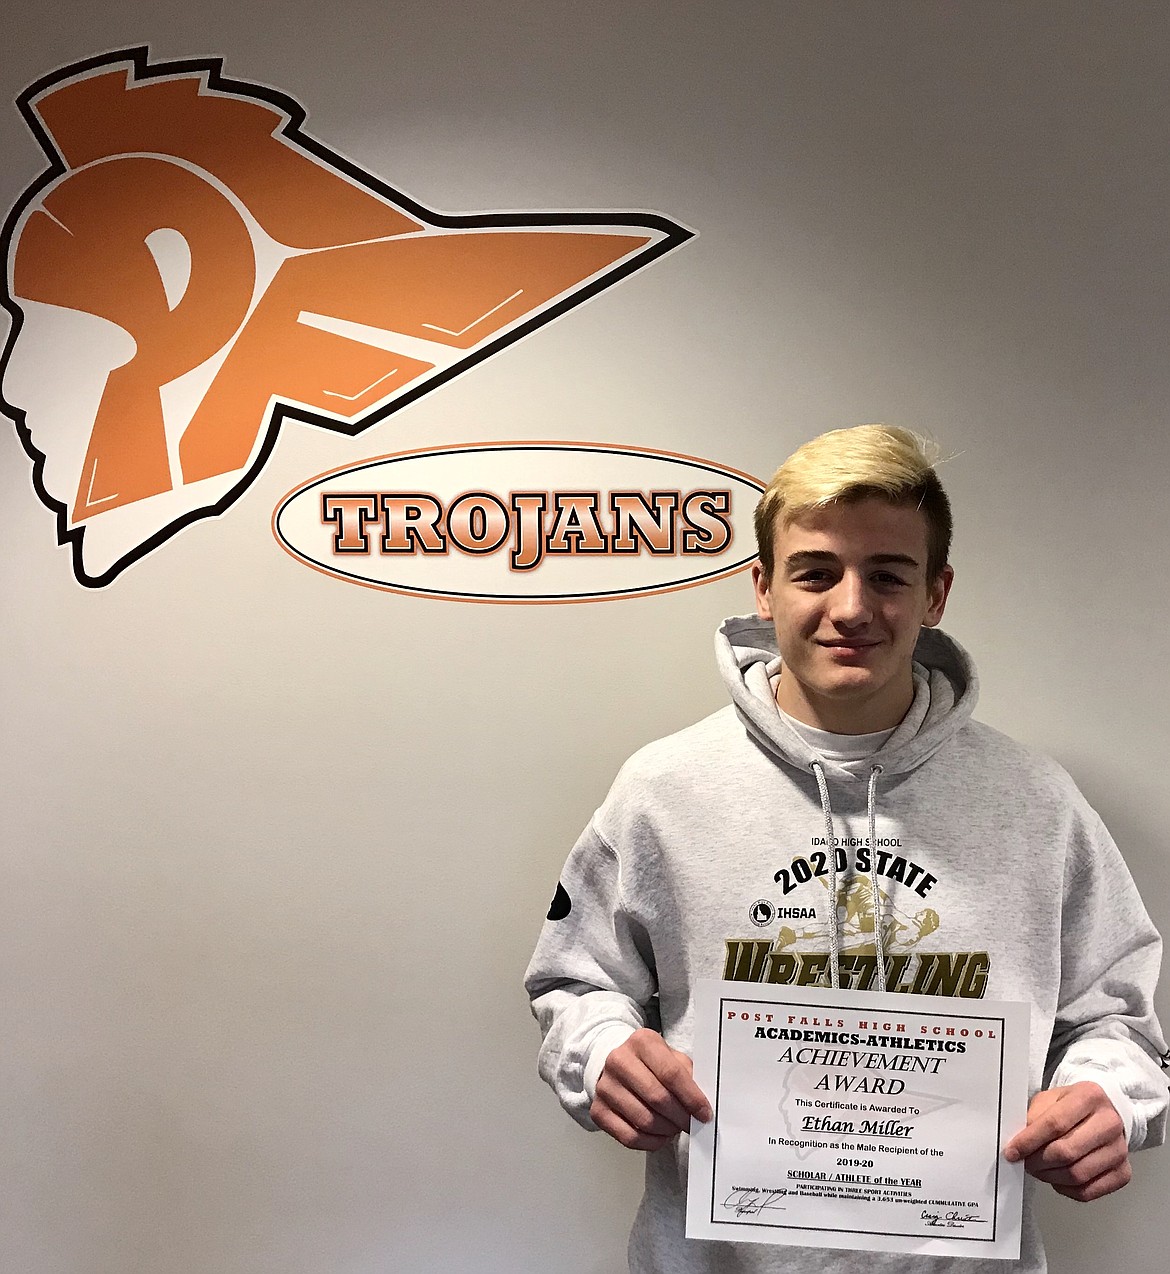 Junior Ethan Miller was named the Post Falls High School boys three-sport student-athlete of the year for 2019-20. The award honors Trojans that participated in three sports during the 2019-20 school year while maintaining an unweighted cumulative GPA between 3.5 and 4.0. Miller, who competed in swimming, wrestling and baseball, maintained a 3.653 GPA.